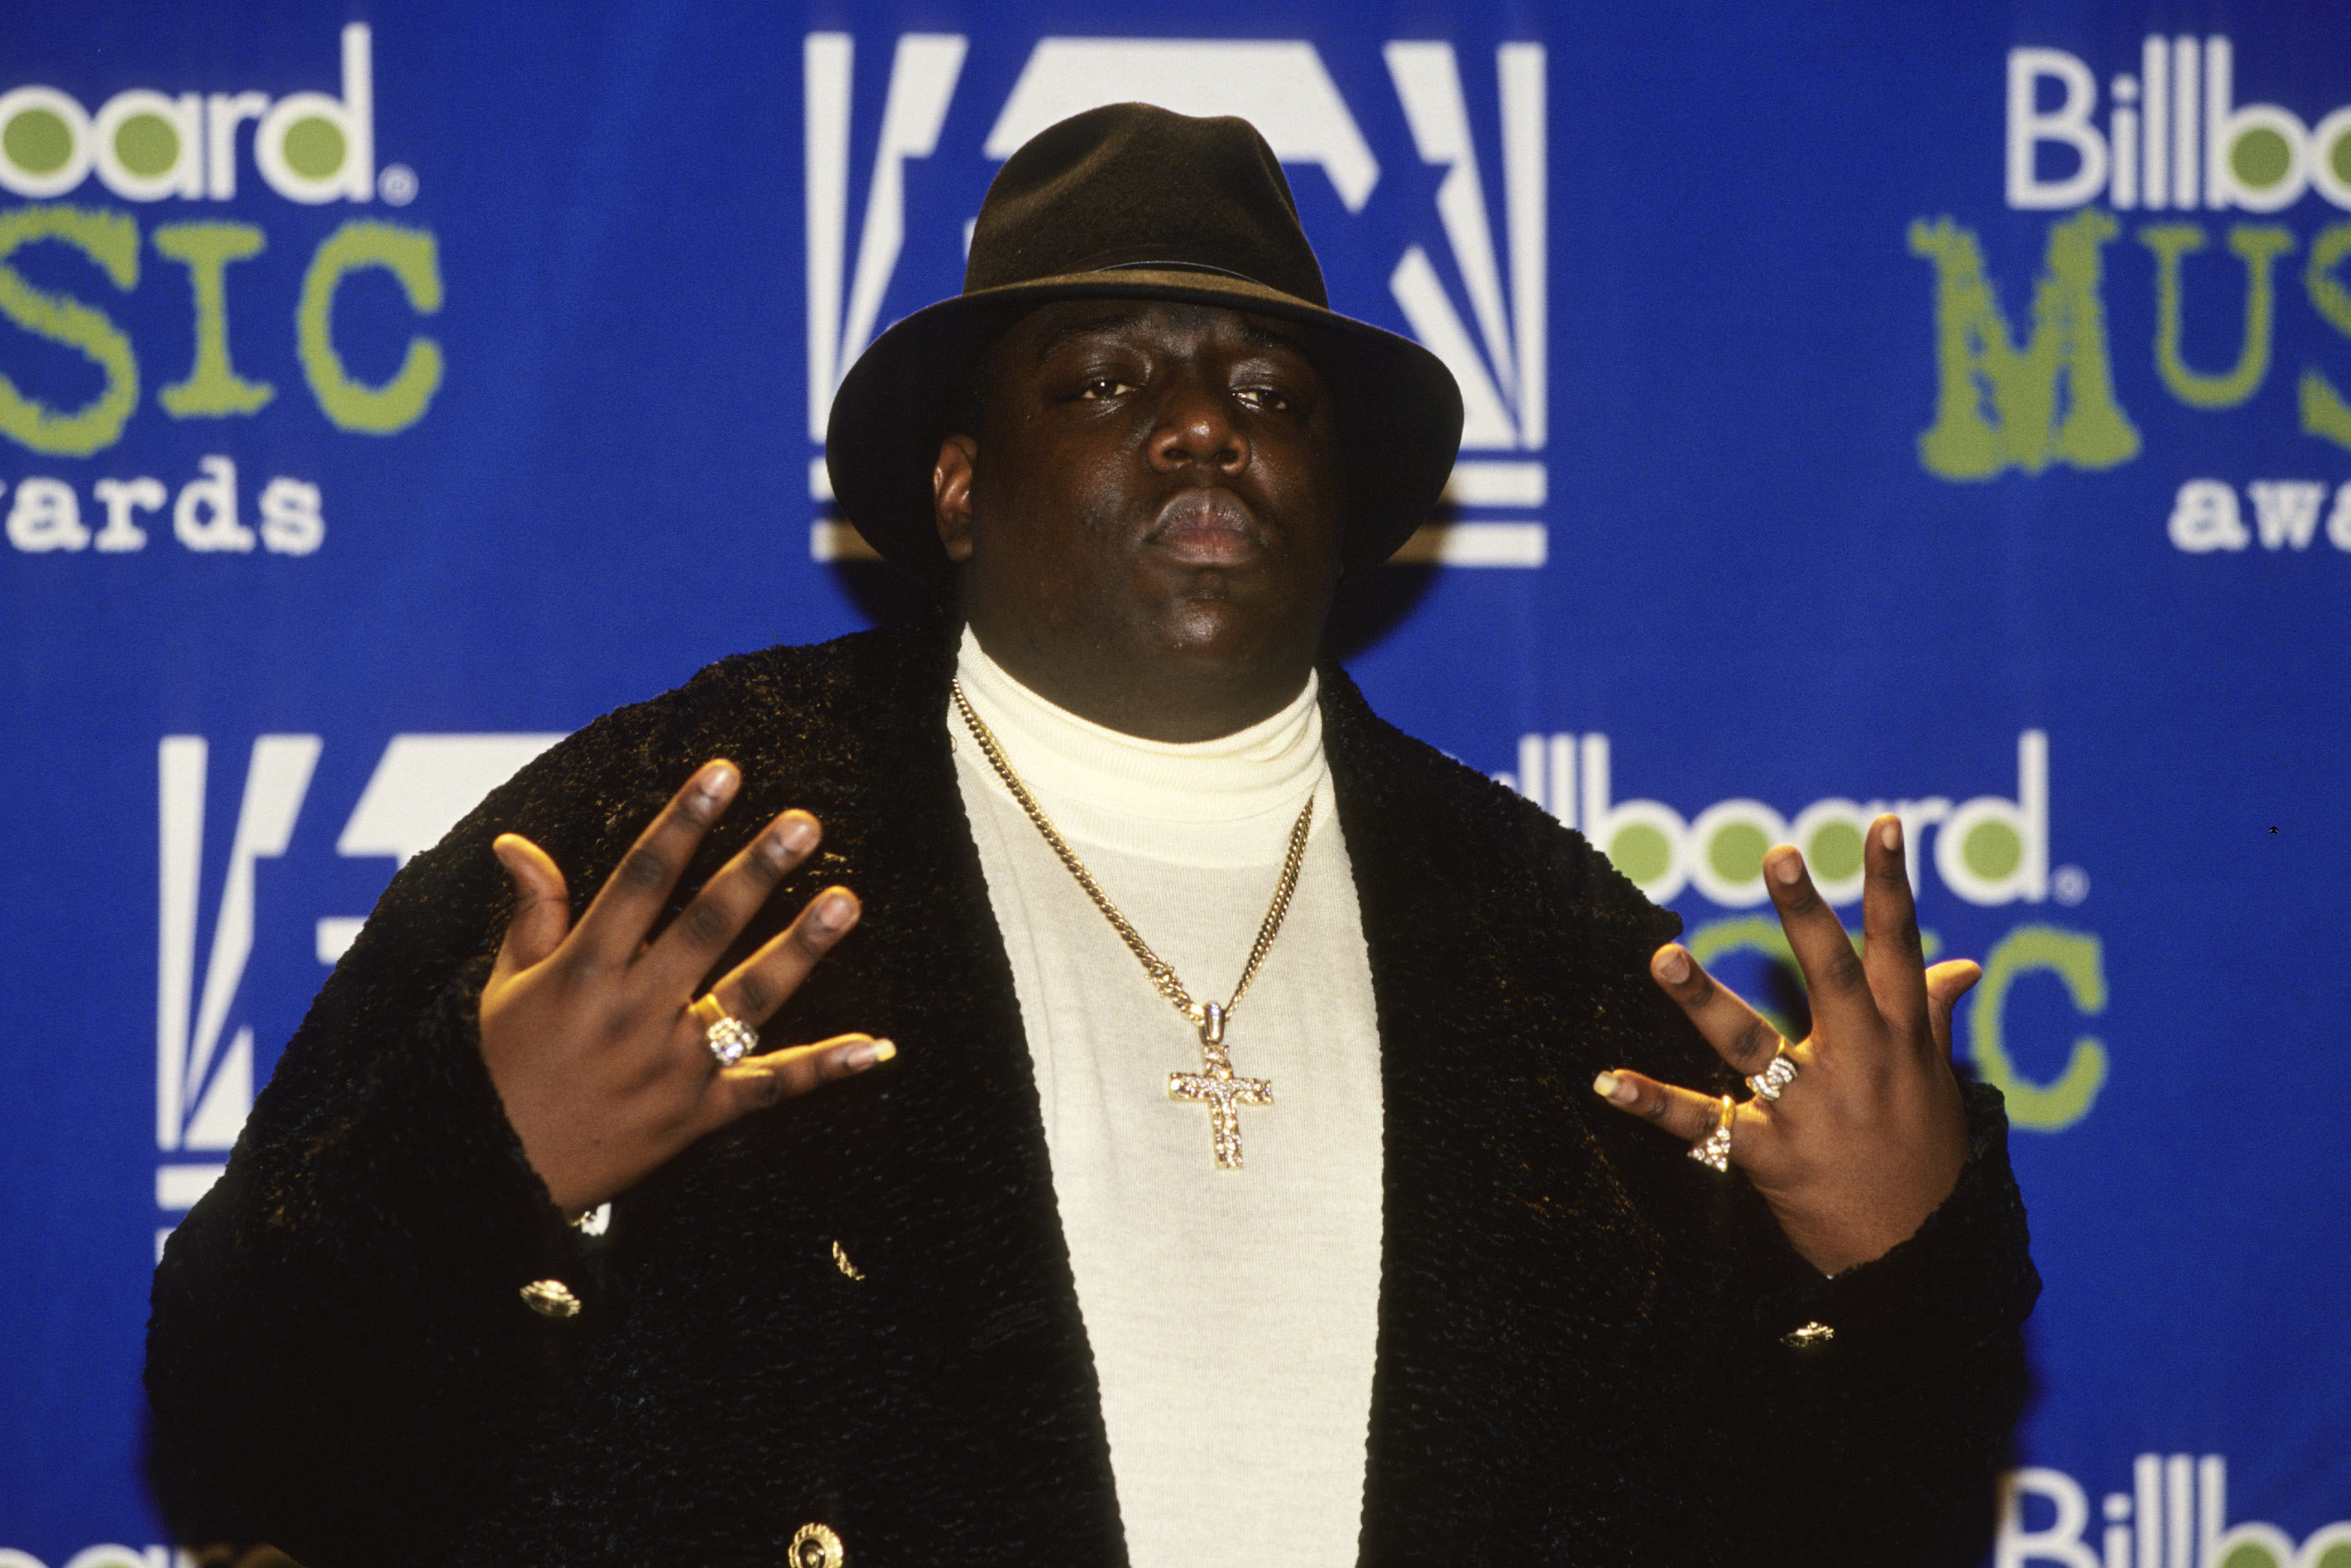 What We Know About Netflix's Biggie Smalls Documentary 'I Got a Story